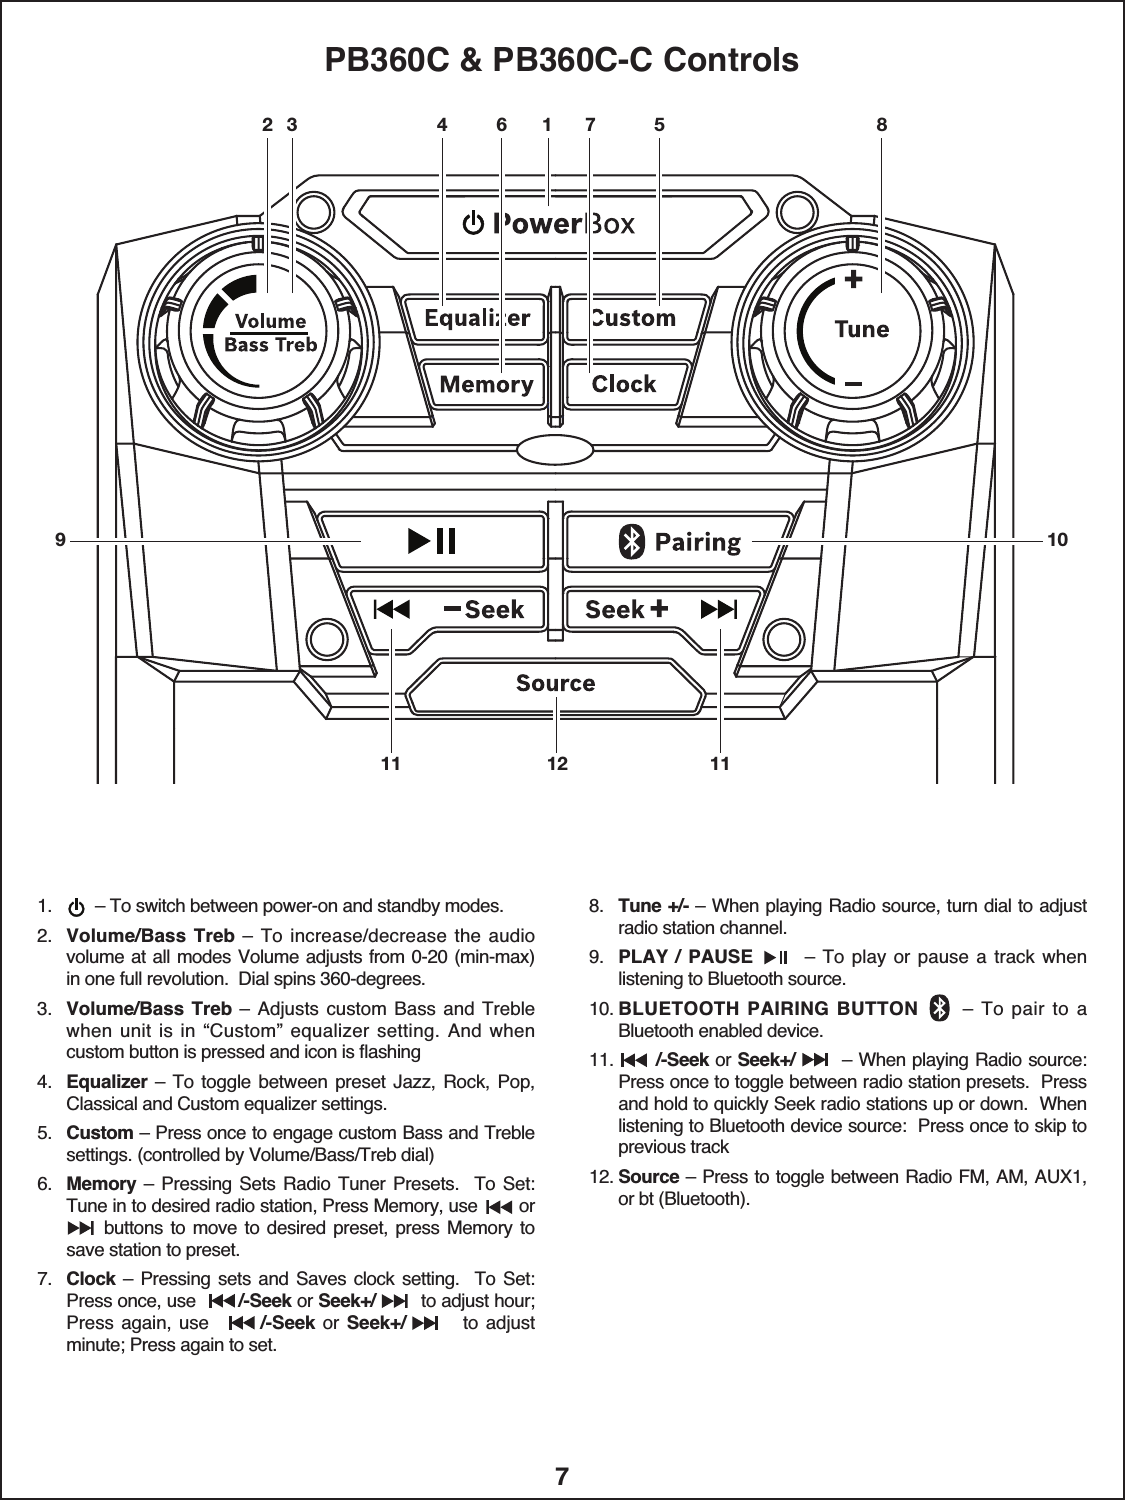 71. – To switch between power-on and standby modes. 2. Volume/Bass  Treb –  To increase/decrease the  audiovolume at all modes Volume adjusts from 0-20 (min-max)in one full revolution.  Dial spins 360-degrees.3. Volume/Bass Treb –  Adjusts  custom Bass and  Treblewhen unit is in  “Custom”  equalizer setting. And whencustom button is pressed and icon is flashing4. Equalizer – To toggle between preset Jazz, Rock, Pop,Classical and Custom equalizer settings.5. Custom – Press once to engage custom Bass and Treblesettings. (controlled by Volume/Bass/Treb dial)6. Memory – Pressing Sets Radio Tuner Presets.   To Set:Tune in to desired radio station, Press Memory, use        or       buttons to move to desired preset, press  Memory tosave station to preset.7. Clock – Pressing sets and Saves clock setting.  To Set:Press once, use        /-Seek or Seek+/ to adjust hour;Press again, use         /-Seek or Seek+/ to adjustminute; Press again to set.                                                      8. Tune +/- – When playing Radio source, turn dial to adjustradio station channel.  9. PLAY /  PAUSE         – To play or  pause a track whenlistening to Bluetooth source.                                                  10. BLUETOOTH PAIRING BUTTON          –  To pair  to  aBluetooth enabled device.11. /-Seek or Seek+/ – When playing Radio source:Press once to toggle between radio station presets.  Pressand hold to quickly Seek radio stations up or down.  Whenlistening to Bluetooth device source:  Press once to skip toprevious track           12. Source – Press to toggle between Radio FM, AM, AUX1,or bt (Bluetooth).PB360C &amp; PB360C-C Controls10911 1112 34675 812